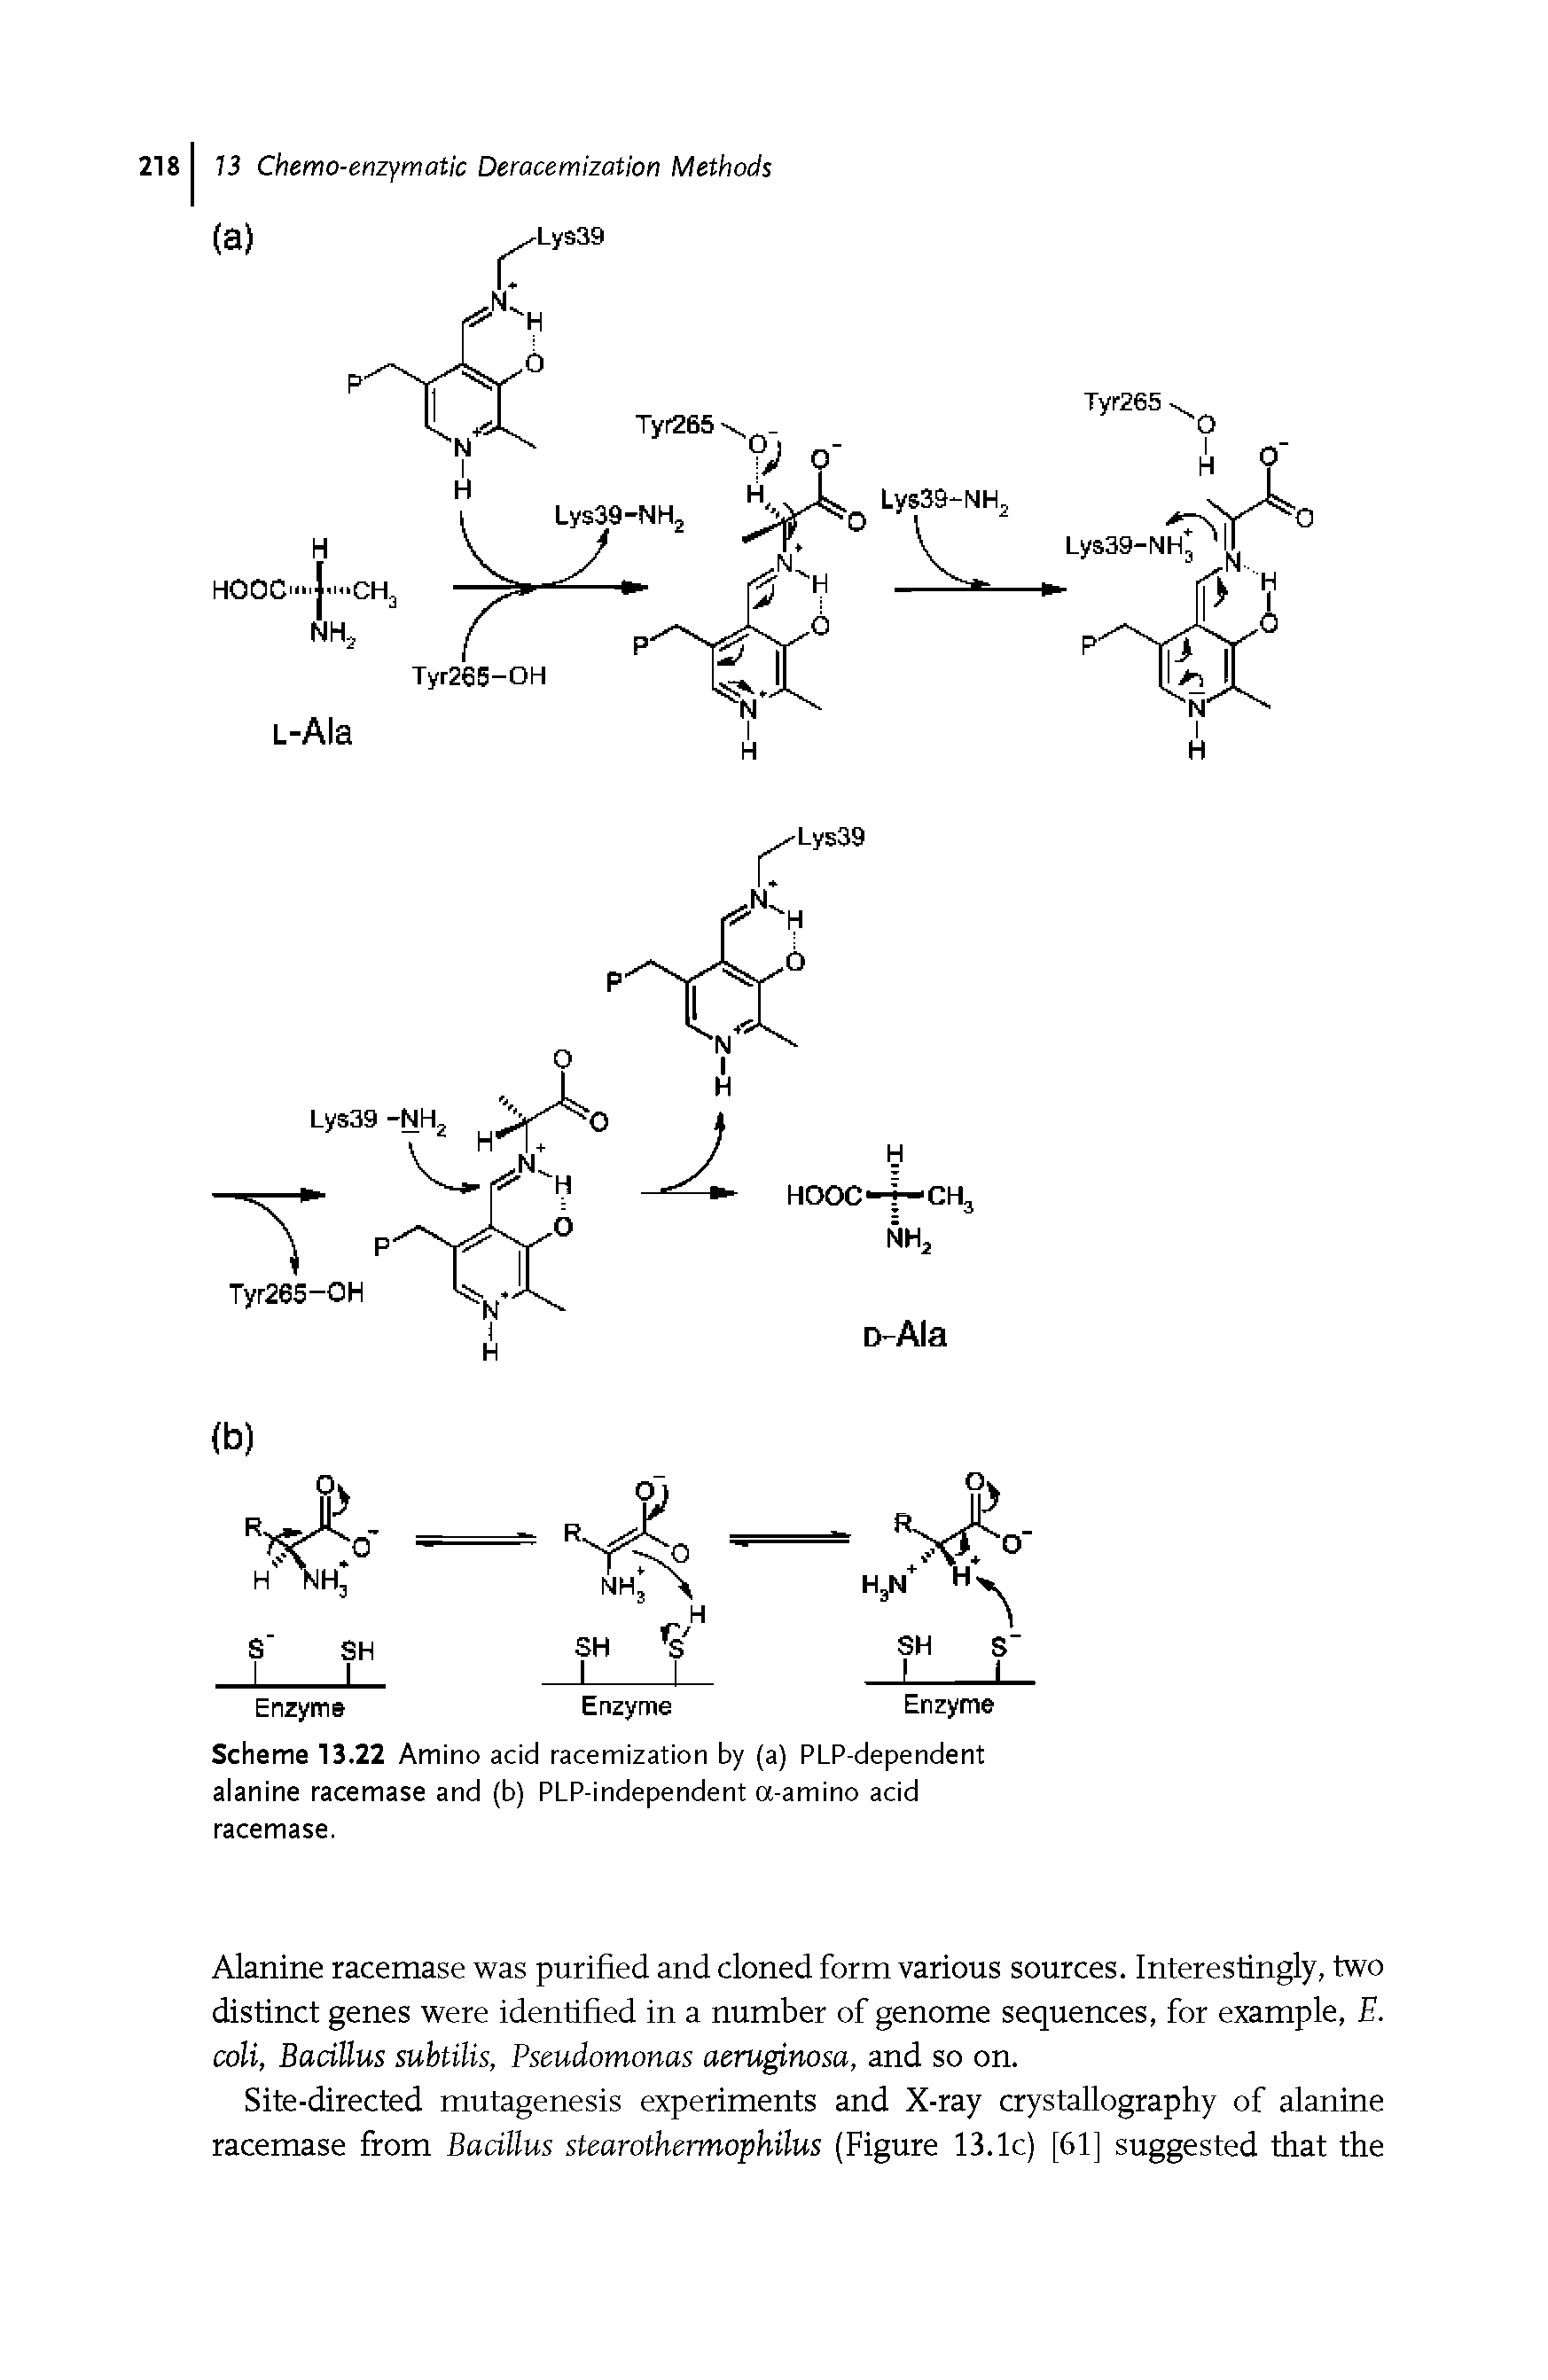 Scheme 13.22 Amino acid racemization by (a) PLP-dependent alanine racemase and (b) PLP-independent a-amino acid racemase.